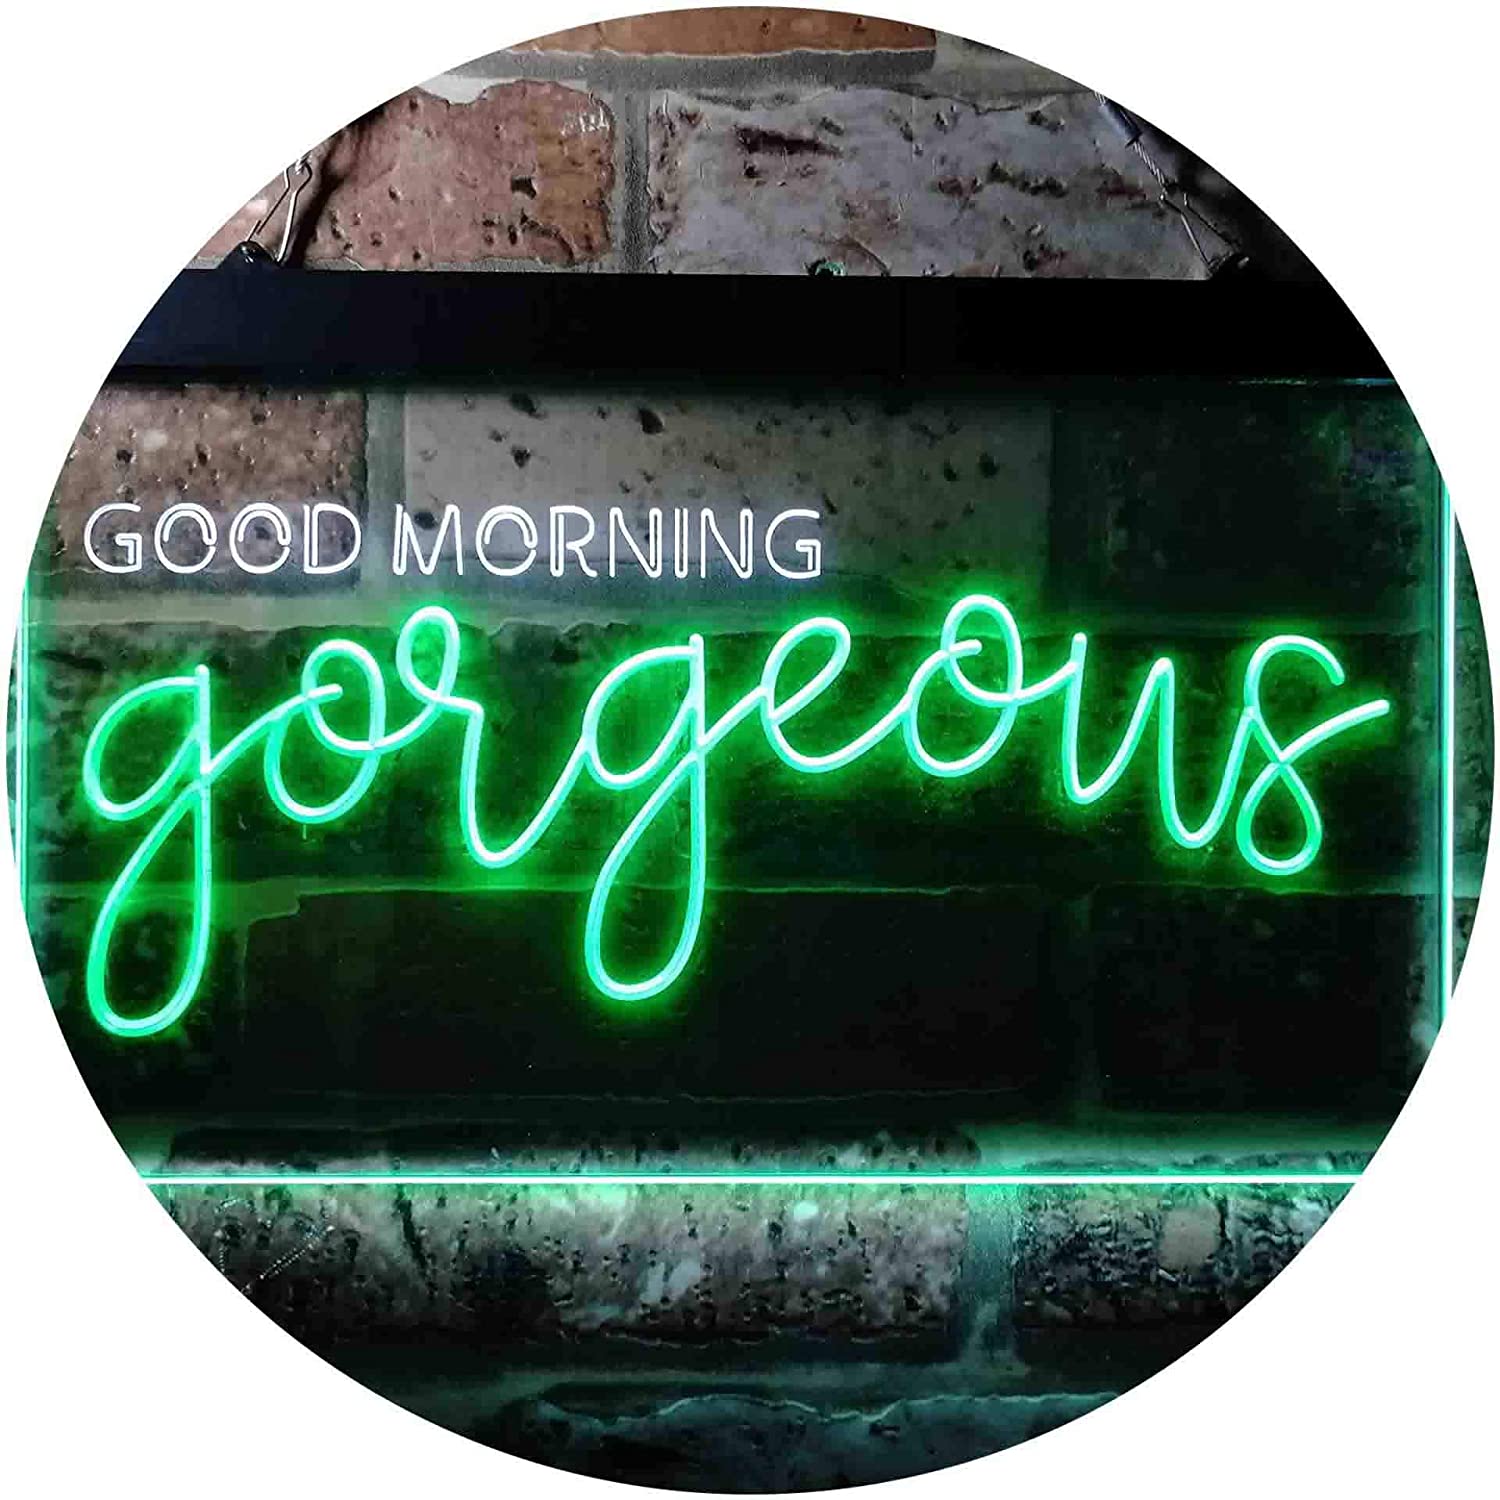 Download do APK de Good Morning Pictures Romantic Gifts para Android